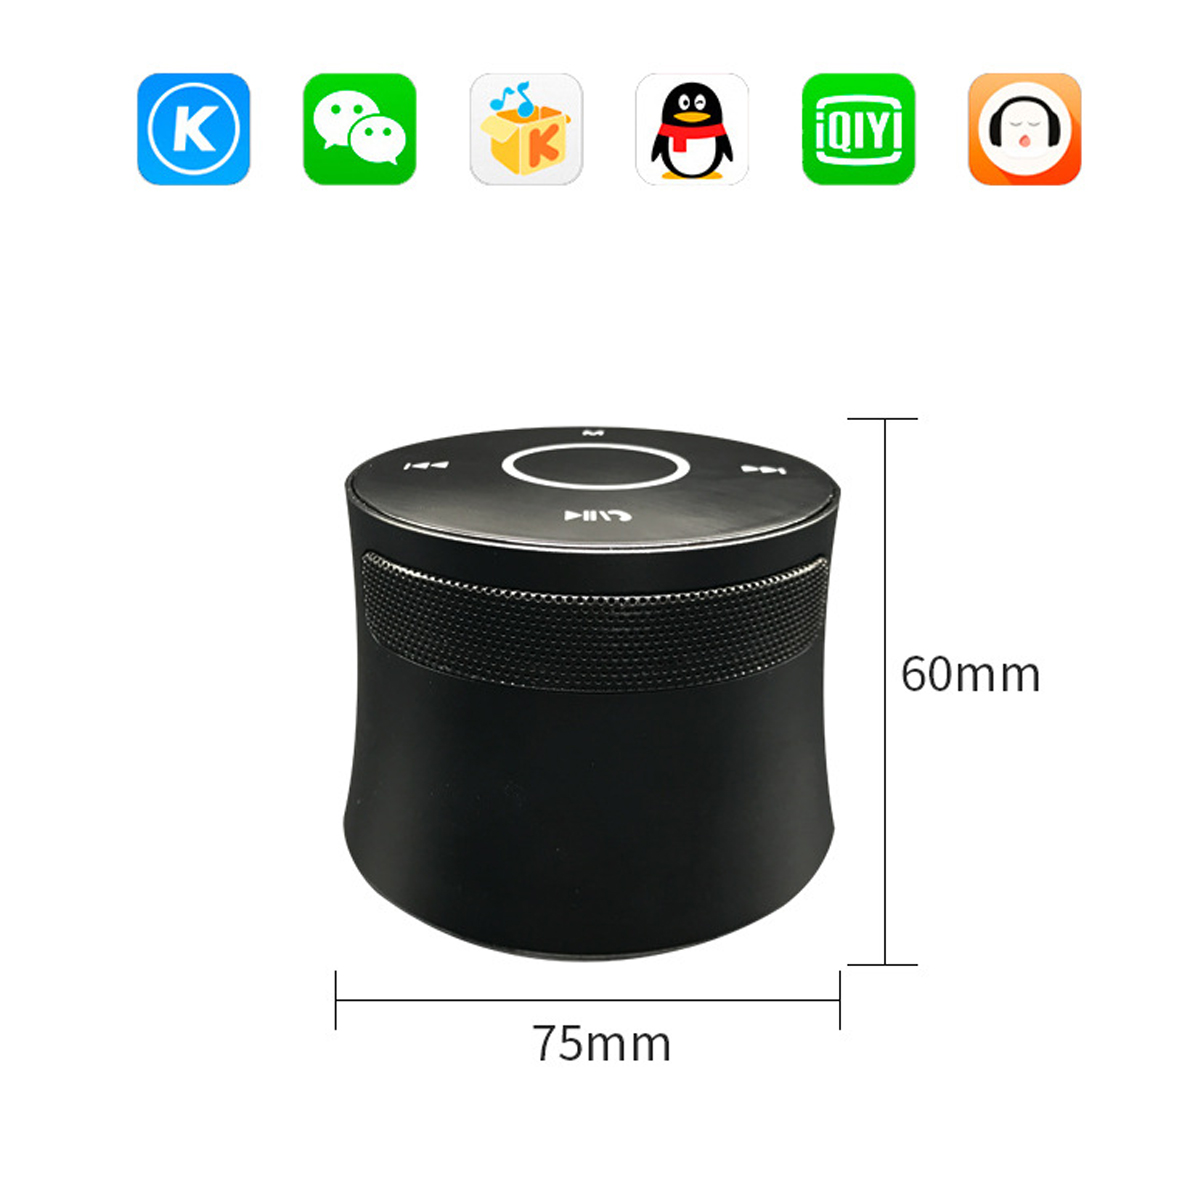 Bakeey-600mAh-TF-Card-Wireless-bluetooth-Speaker-AUX-Playback-HIFI-Sound-Player-Support-A2DP-AVRCP-H-1642267-4